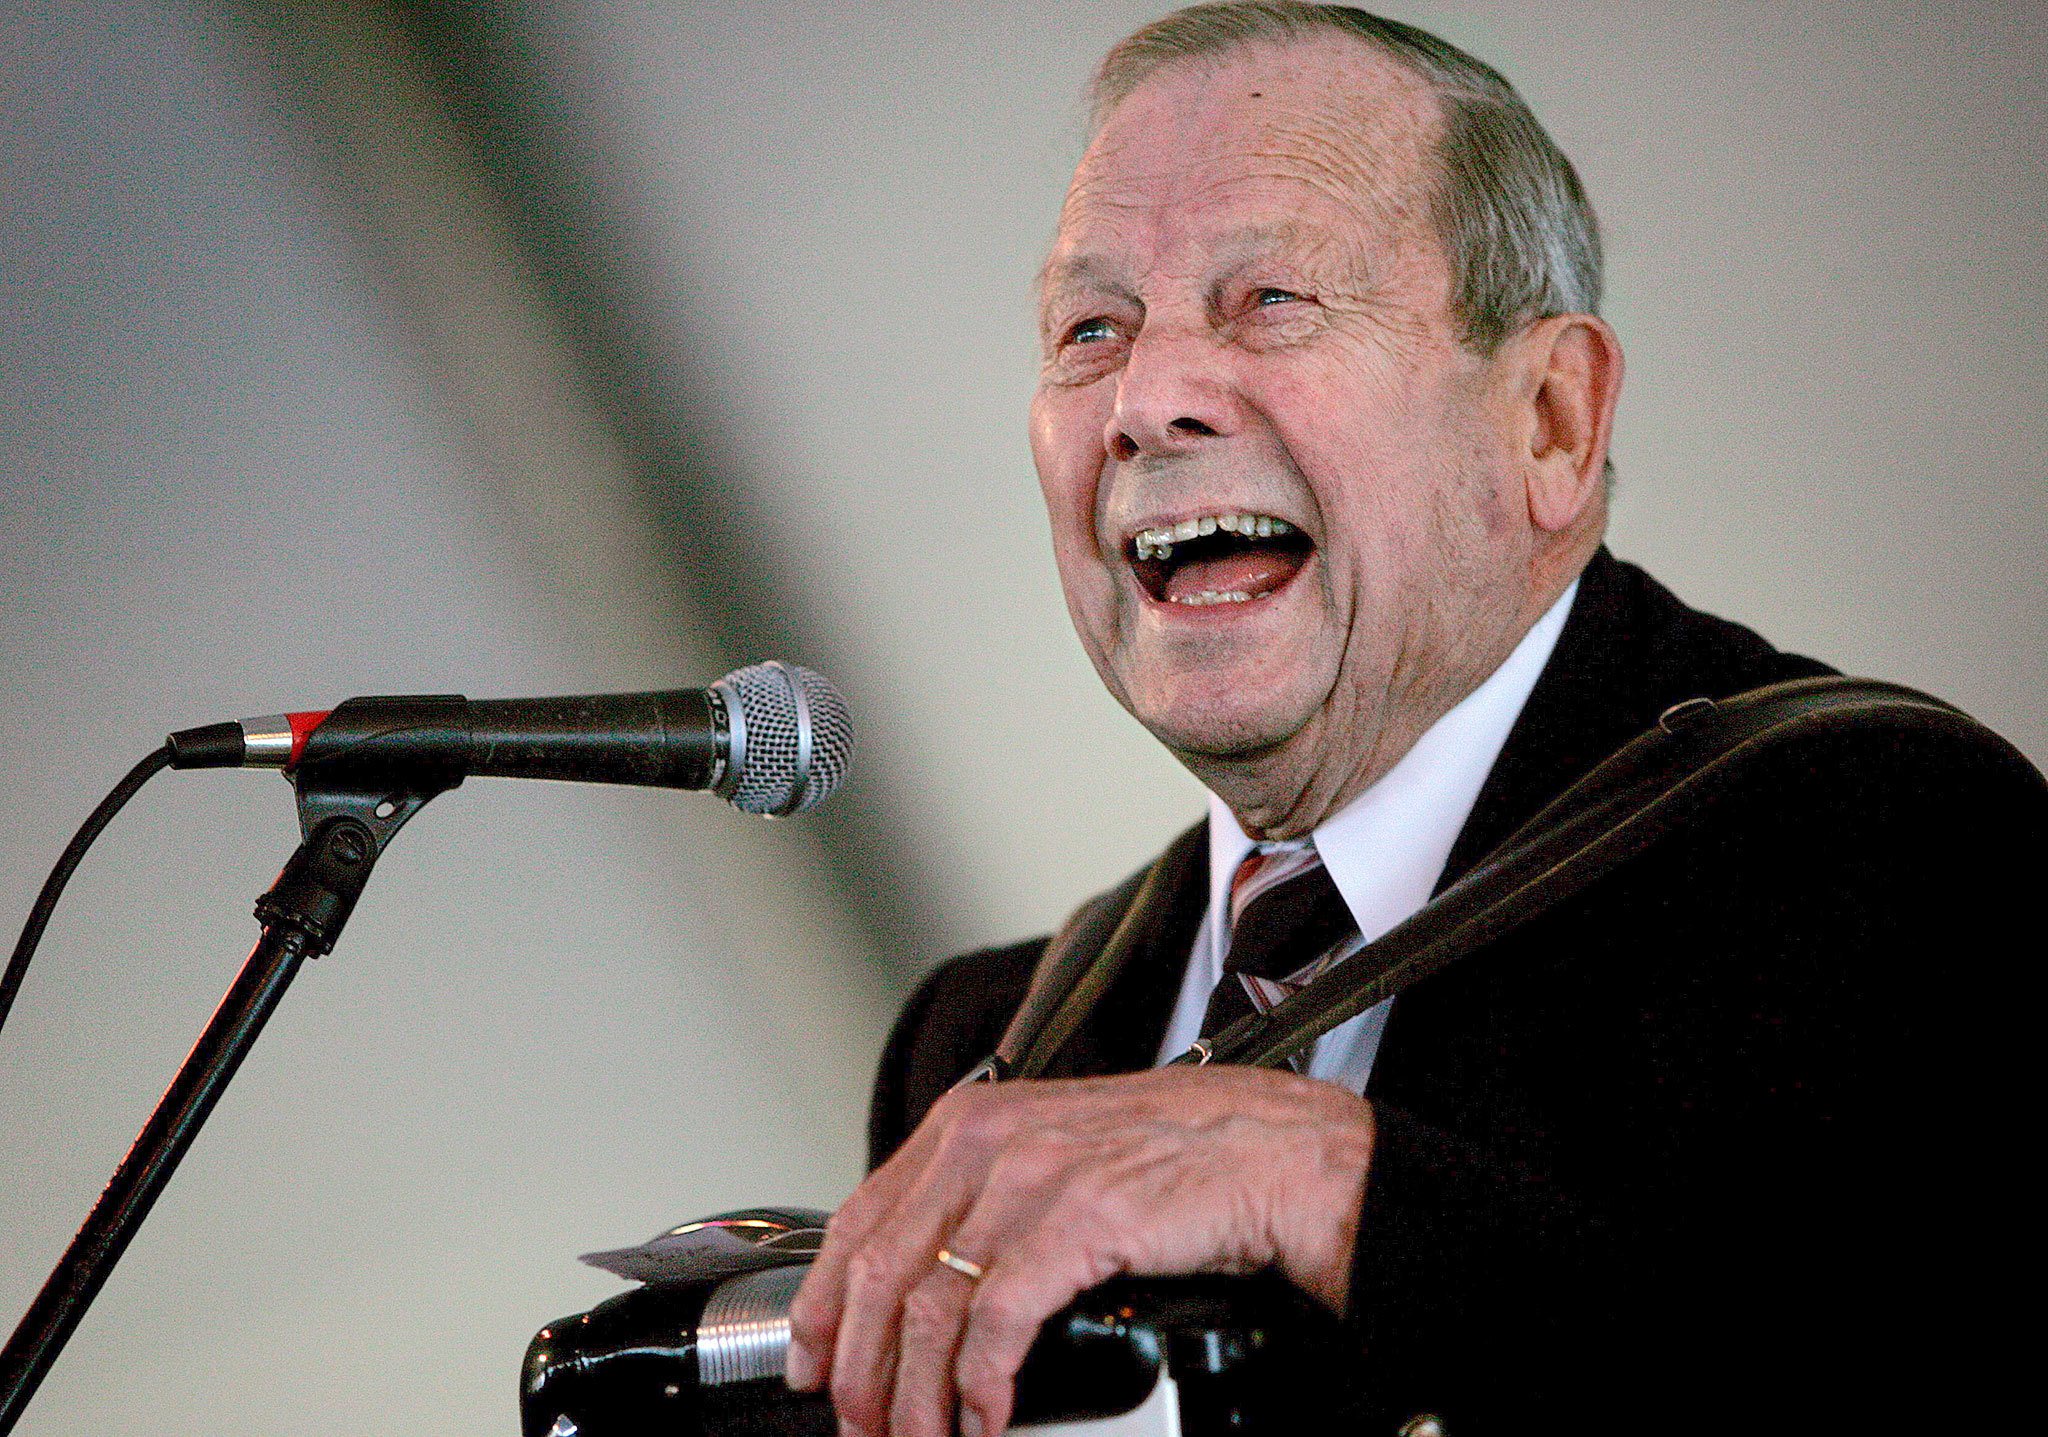 Stan Boreson, dubbed the “King of Scandinavian Humor,” tells a joke at the Everett Sausage Festival on Oct. 6, 2007. The Everett native and Camano Island resident passed away at age 91. Boreson once hosted a popular children’s television show on KING-TV, and performed at festivals and fairs. (Herald File Photo)